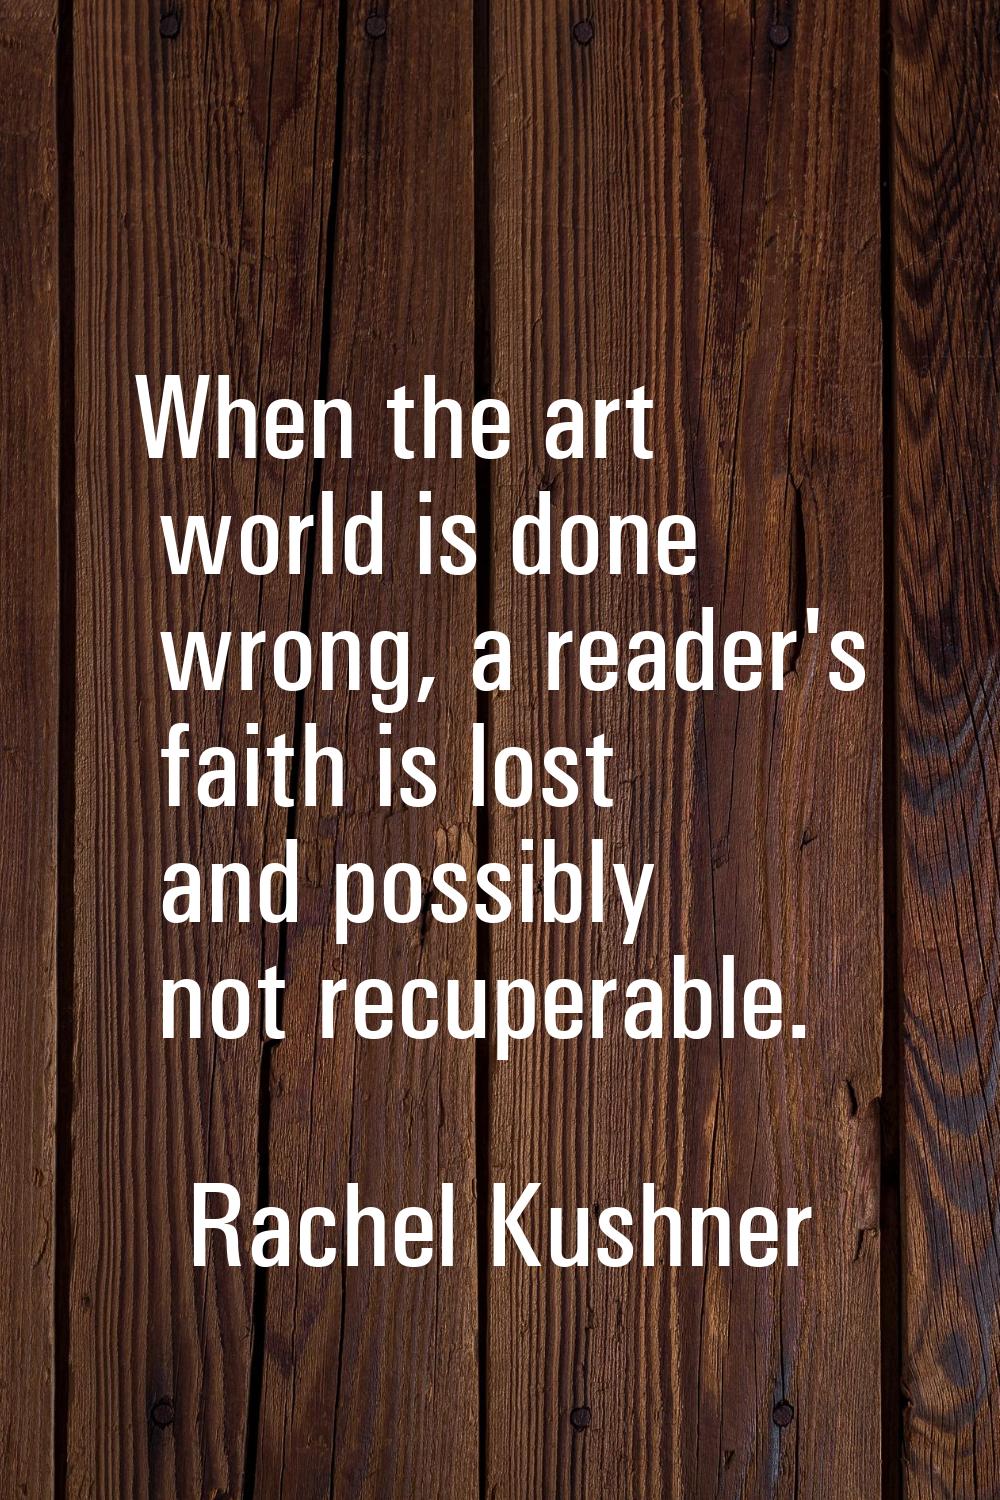 When the art world is done wrong, a reader's faith is lost and possibly not recuperable.